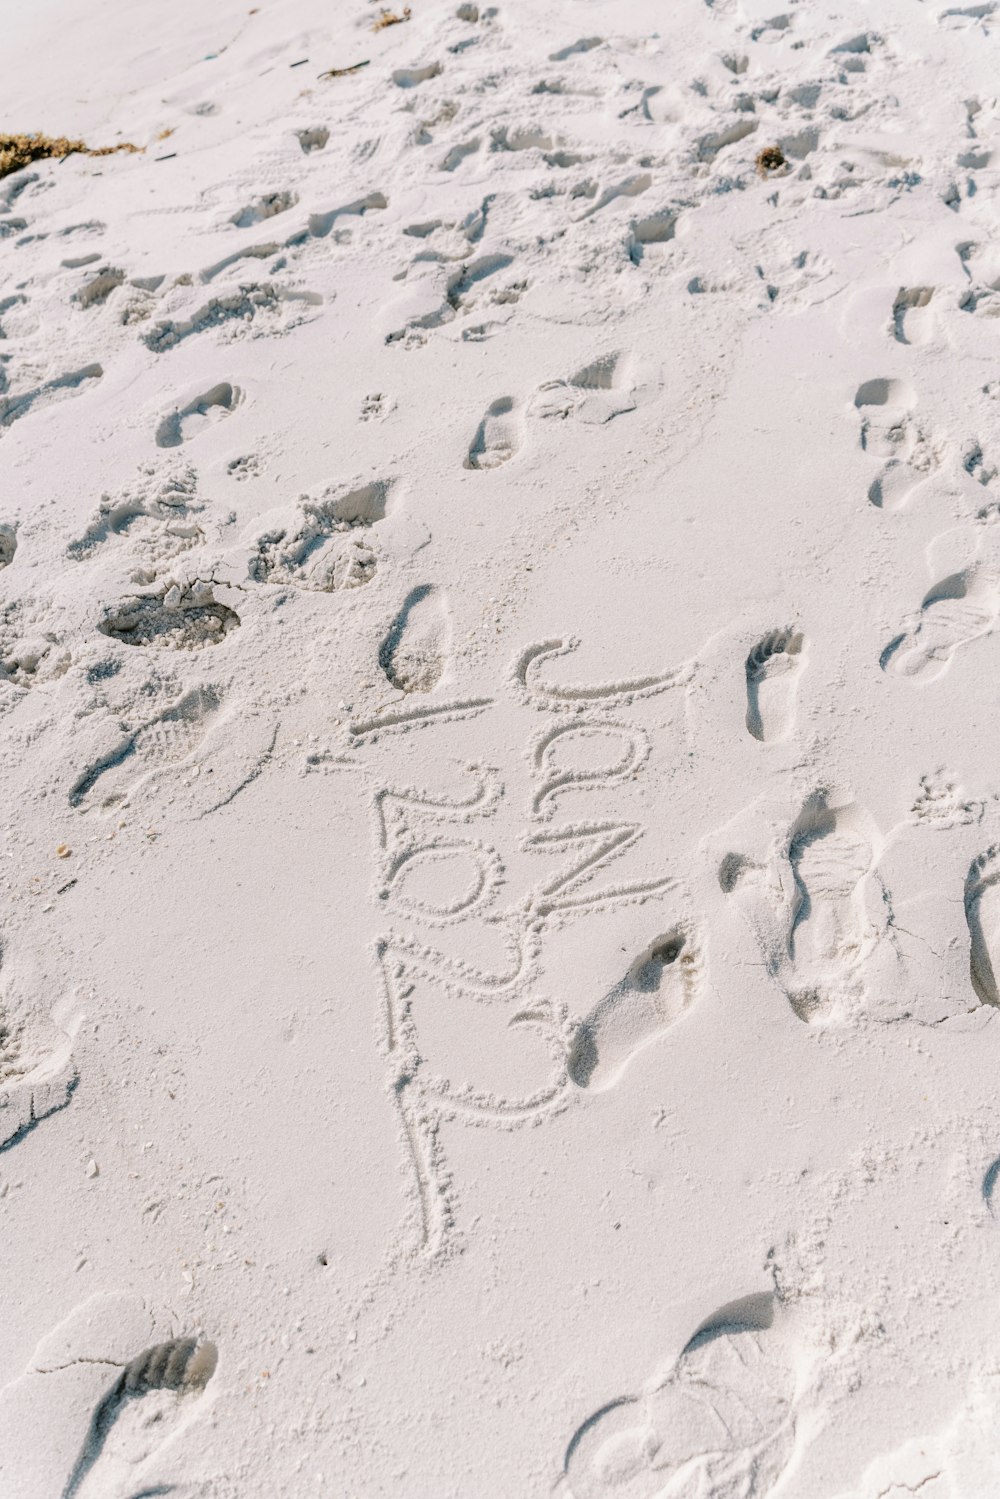 a sandy beach covered in footprints and writing